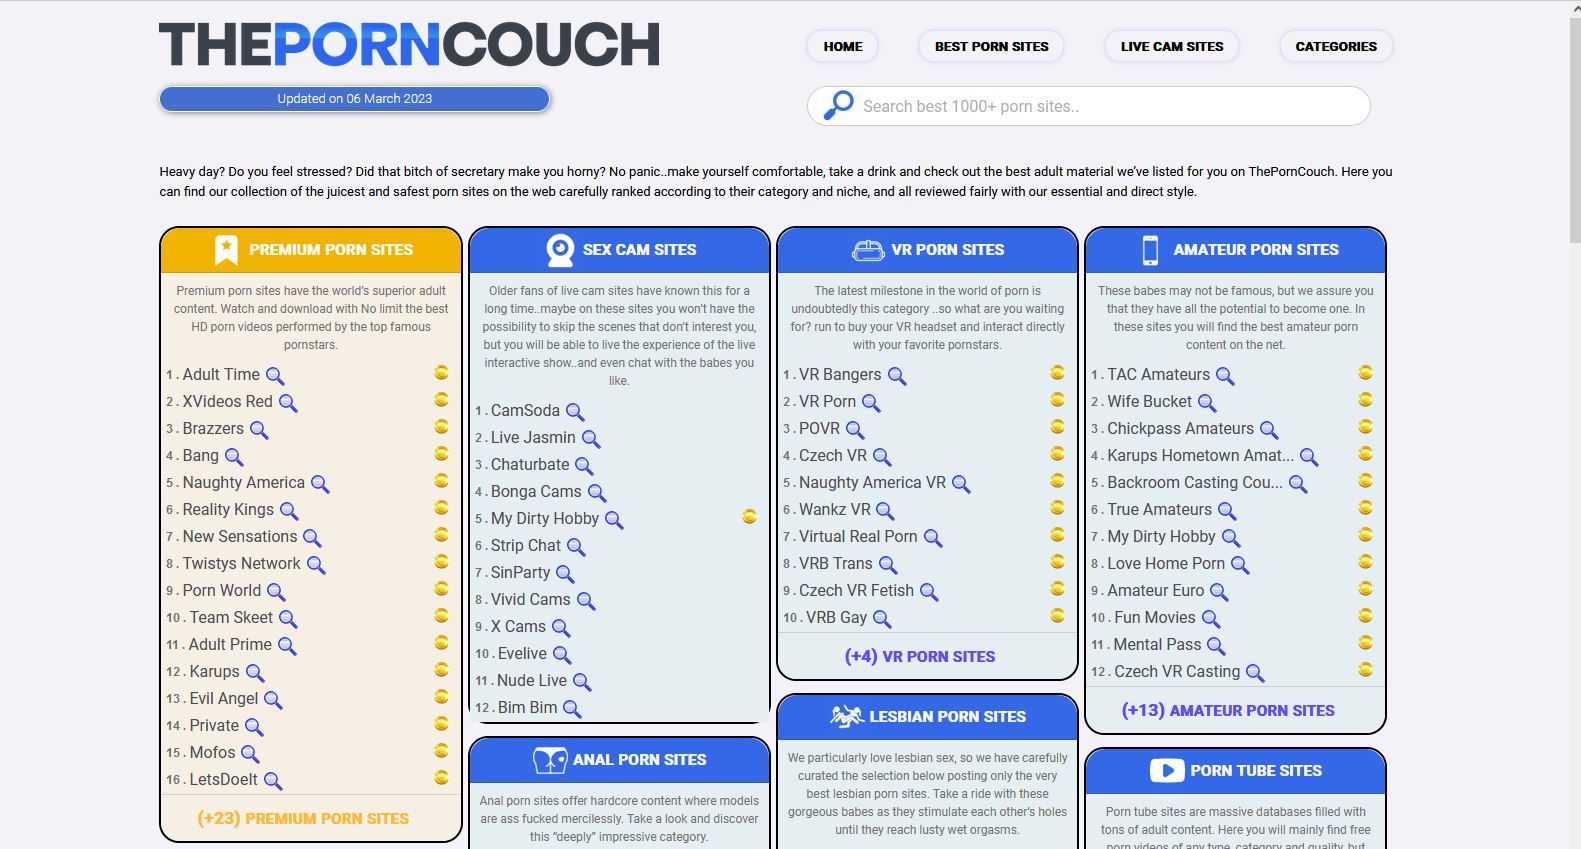 ThePornCouch An Alternative Source to Find Quality Porn Sites